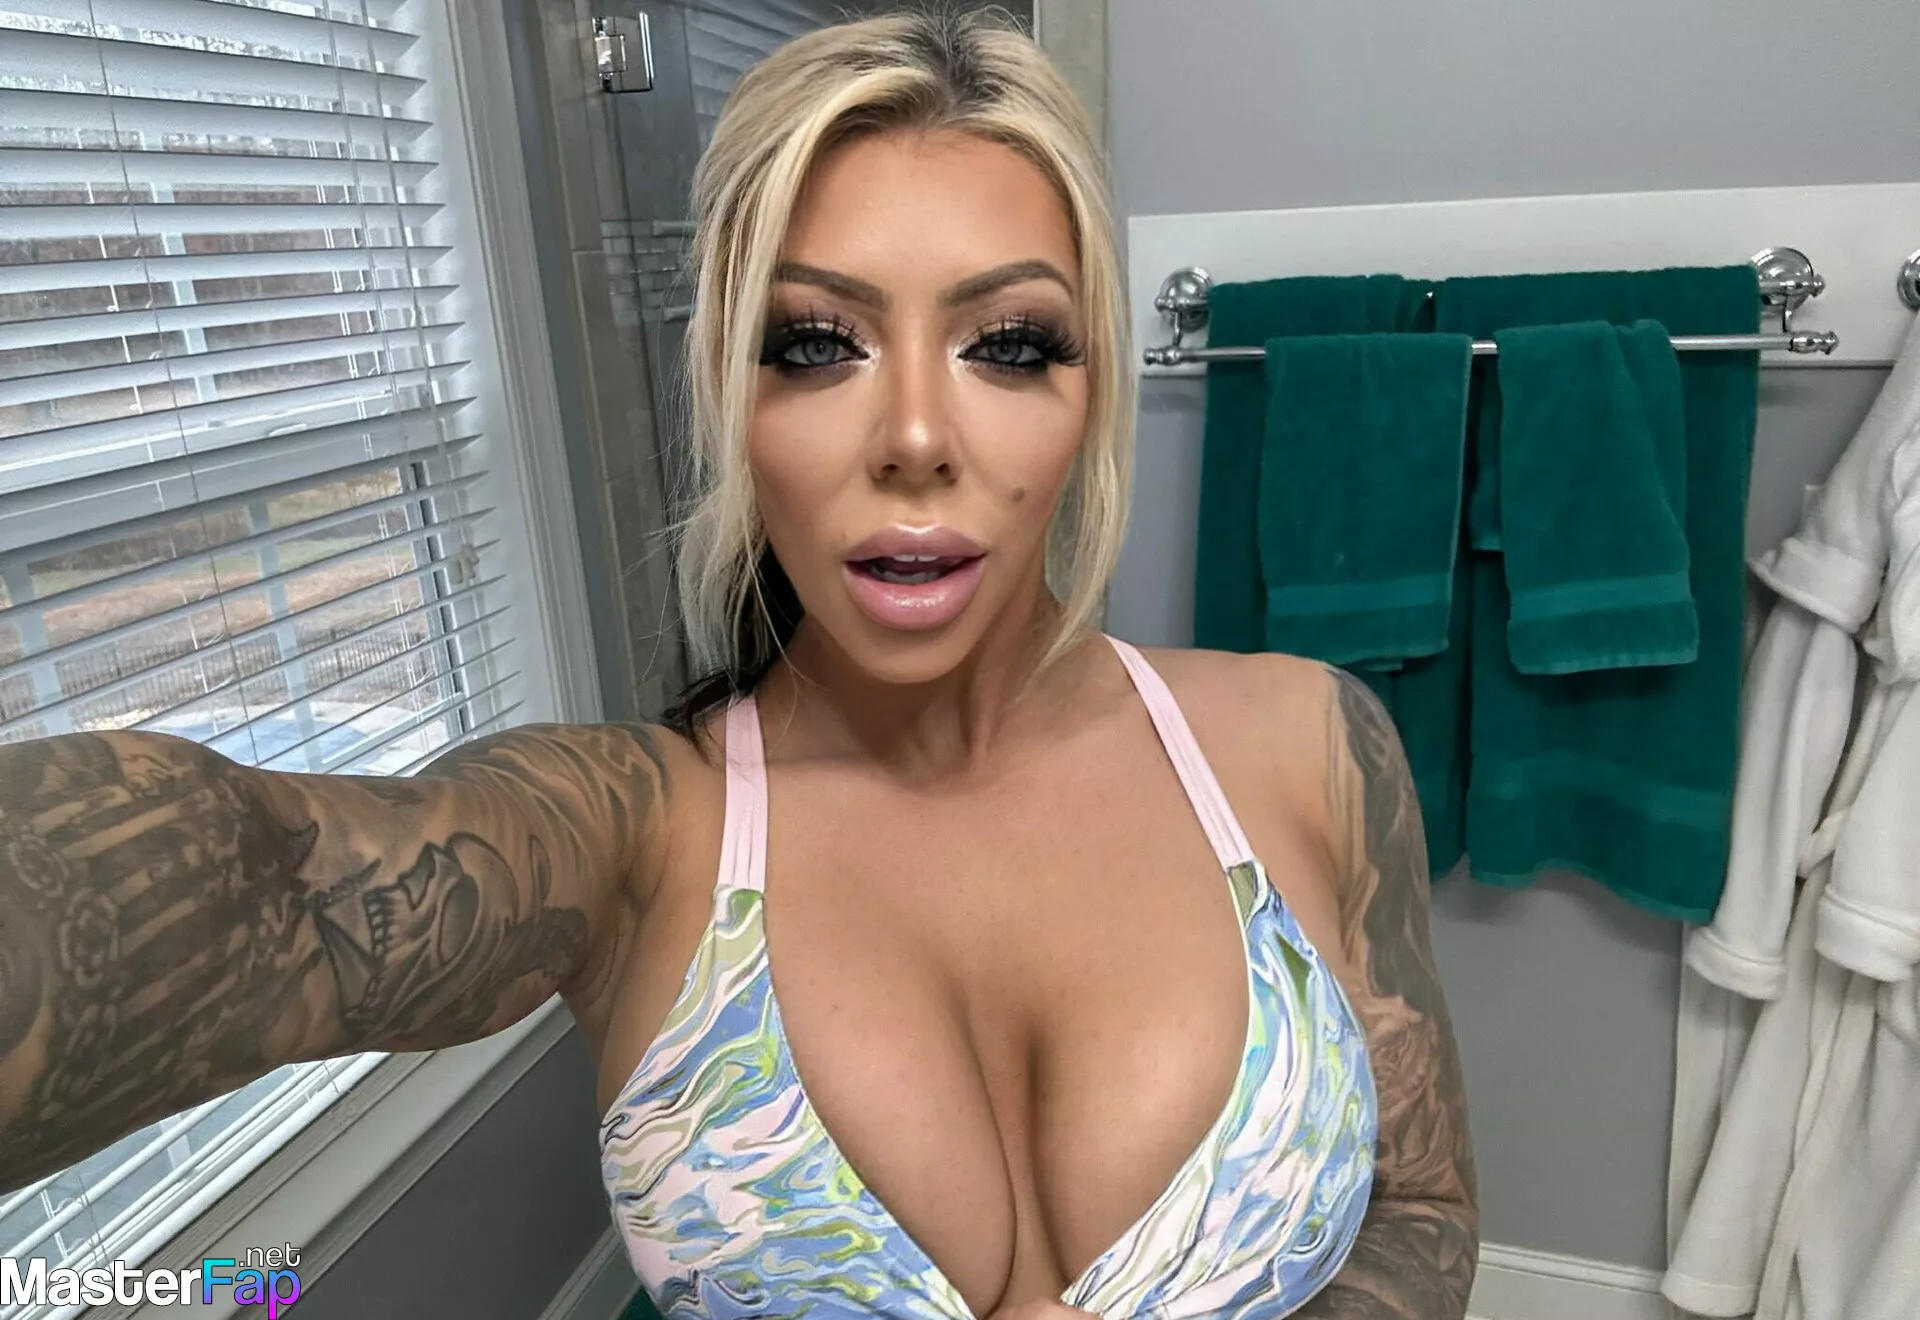 Karma rx breaking out